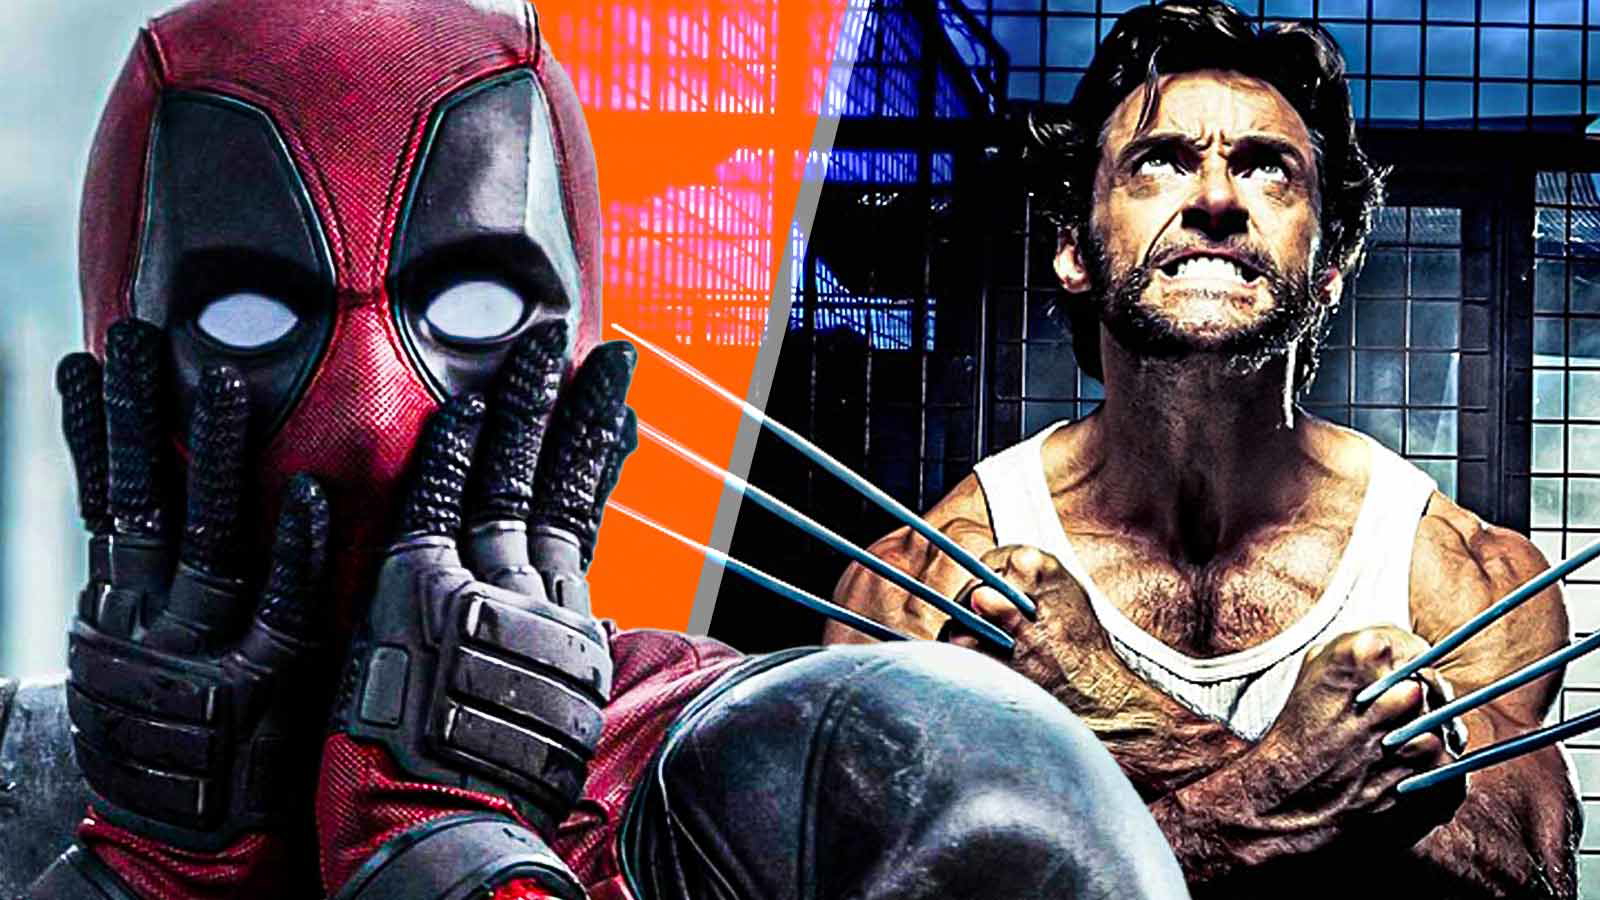 “There’s some juice in this”: Deadpool Creator Rob Liefeld Had an ‘Aha Moment’ After Watching X-Men Origins: Wolverine Despite its Abhorrent Portrayal of the Anti-hero